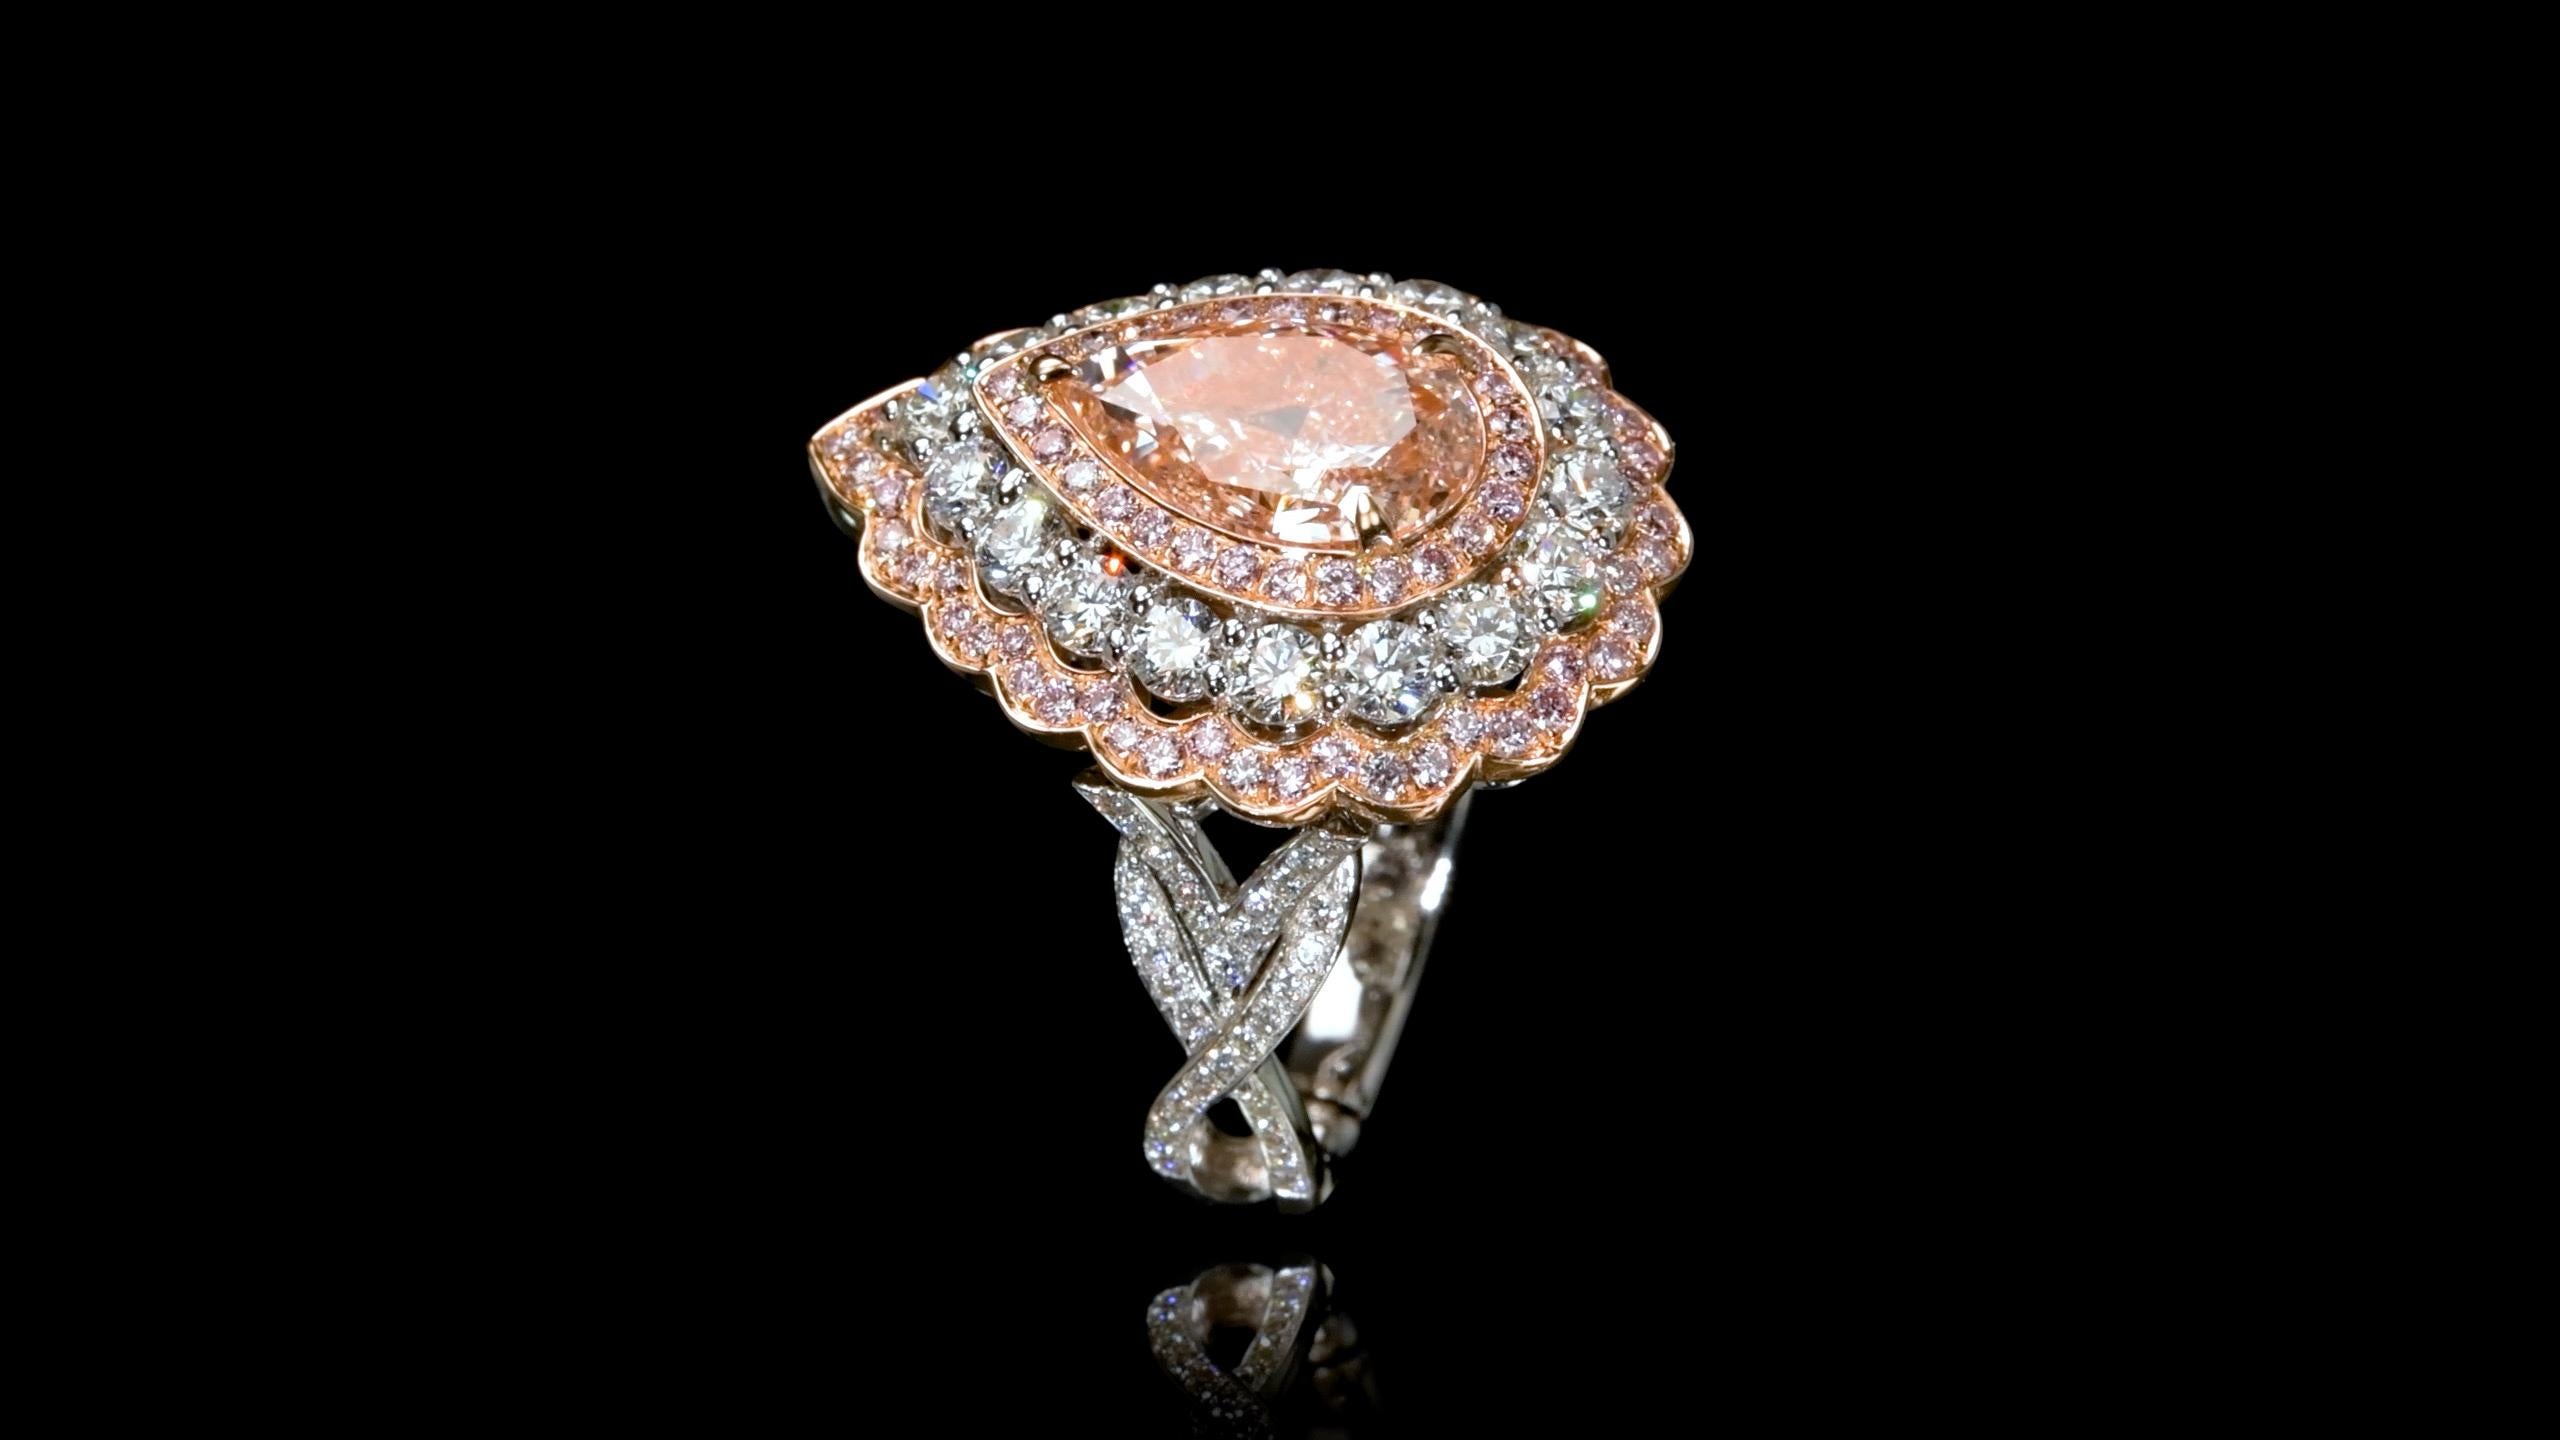 From Emilio Jewelry, a well known and respected wholesaler/dealer located on New York’s iconic Fifth Avenue, 
A very special Pink diamond dazzles and stuns weighing just over 2.50 carats. Set with colorless and pink diamonds in 18k gold. 

Please